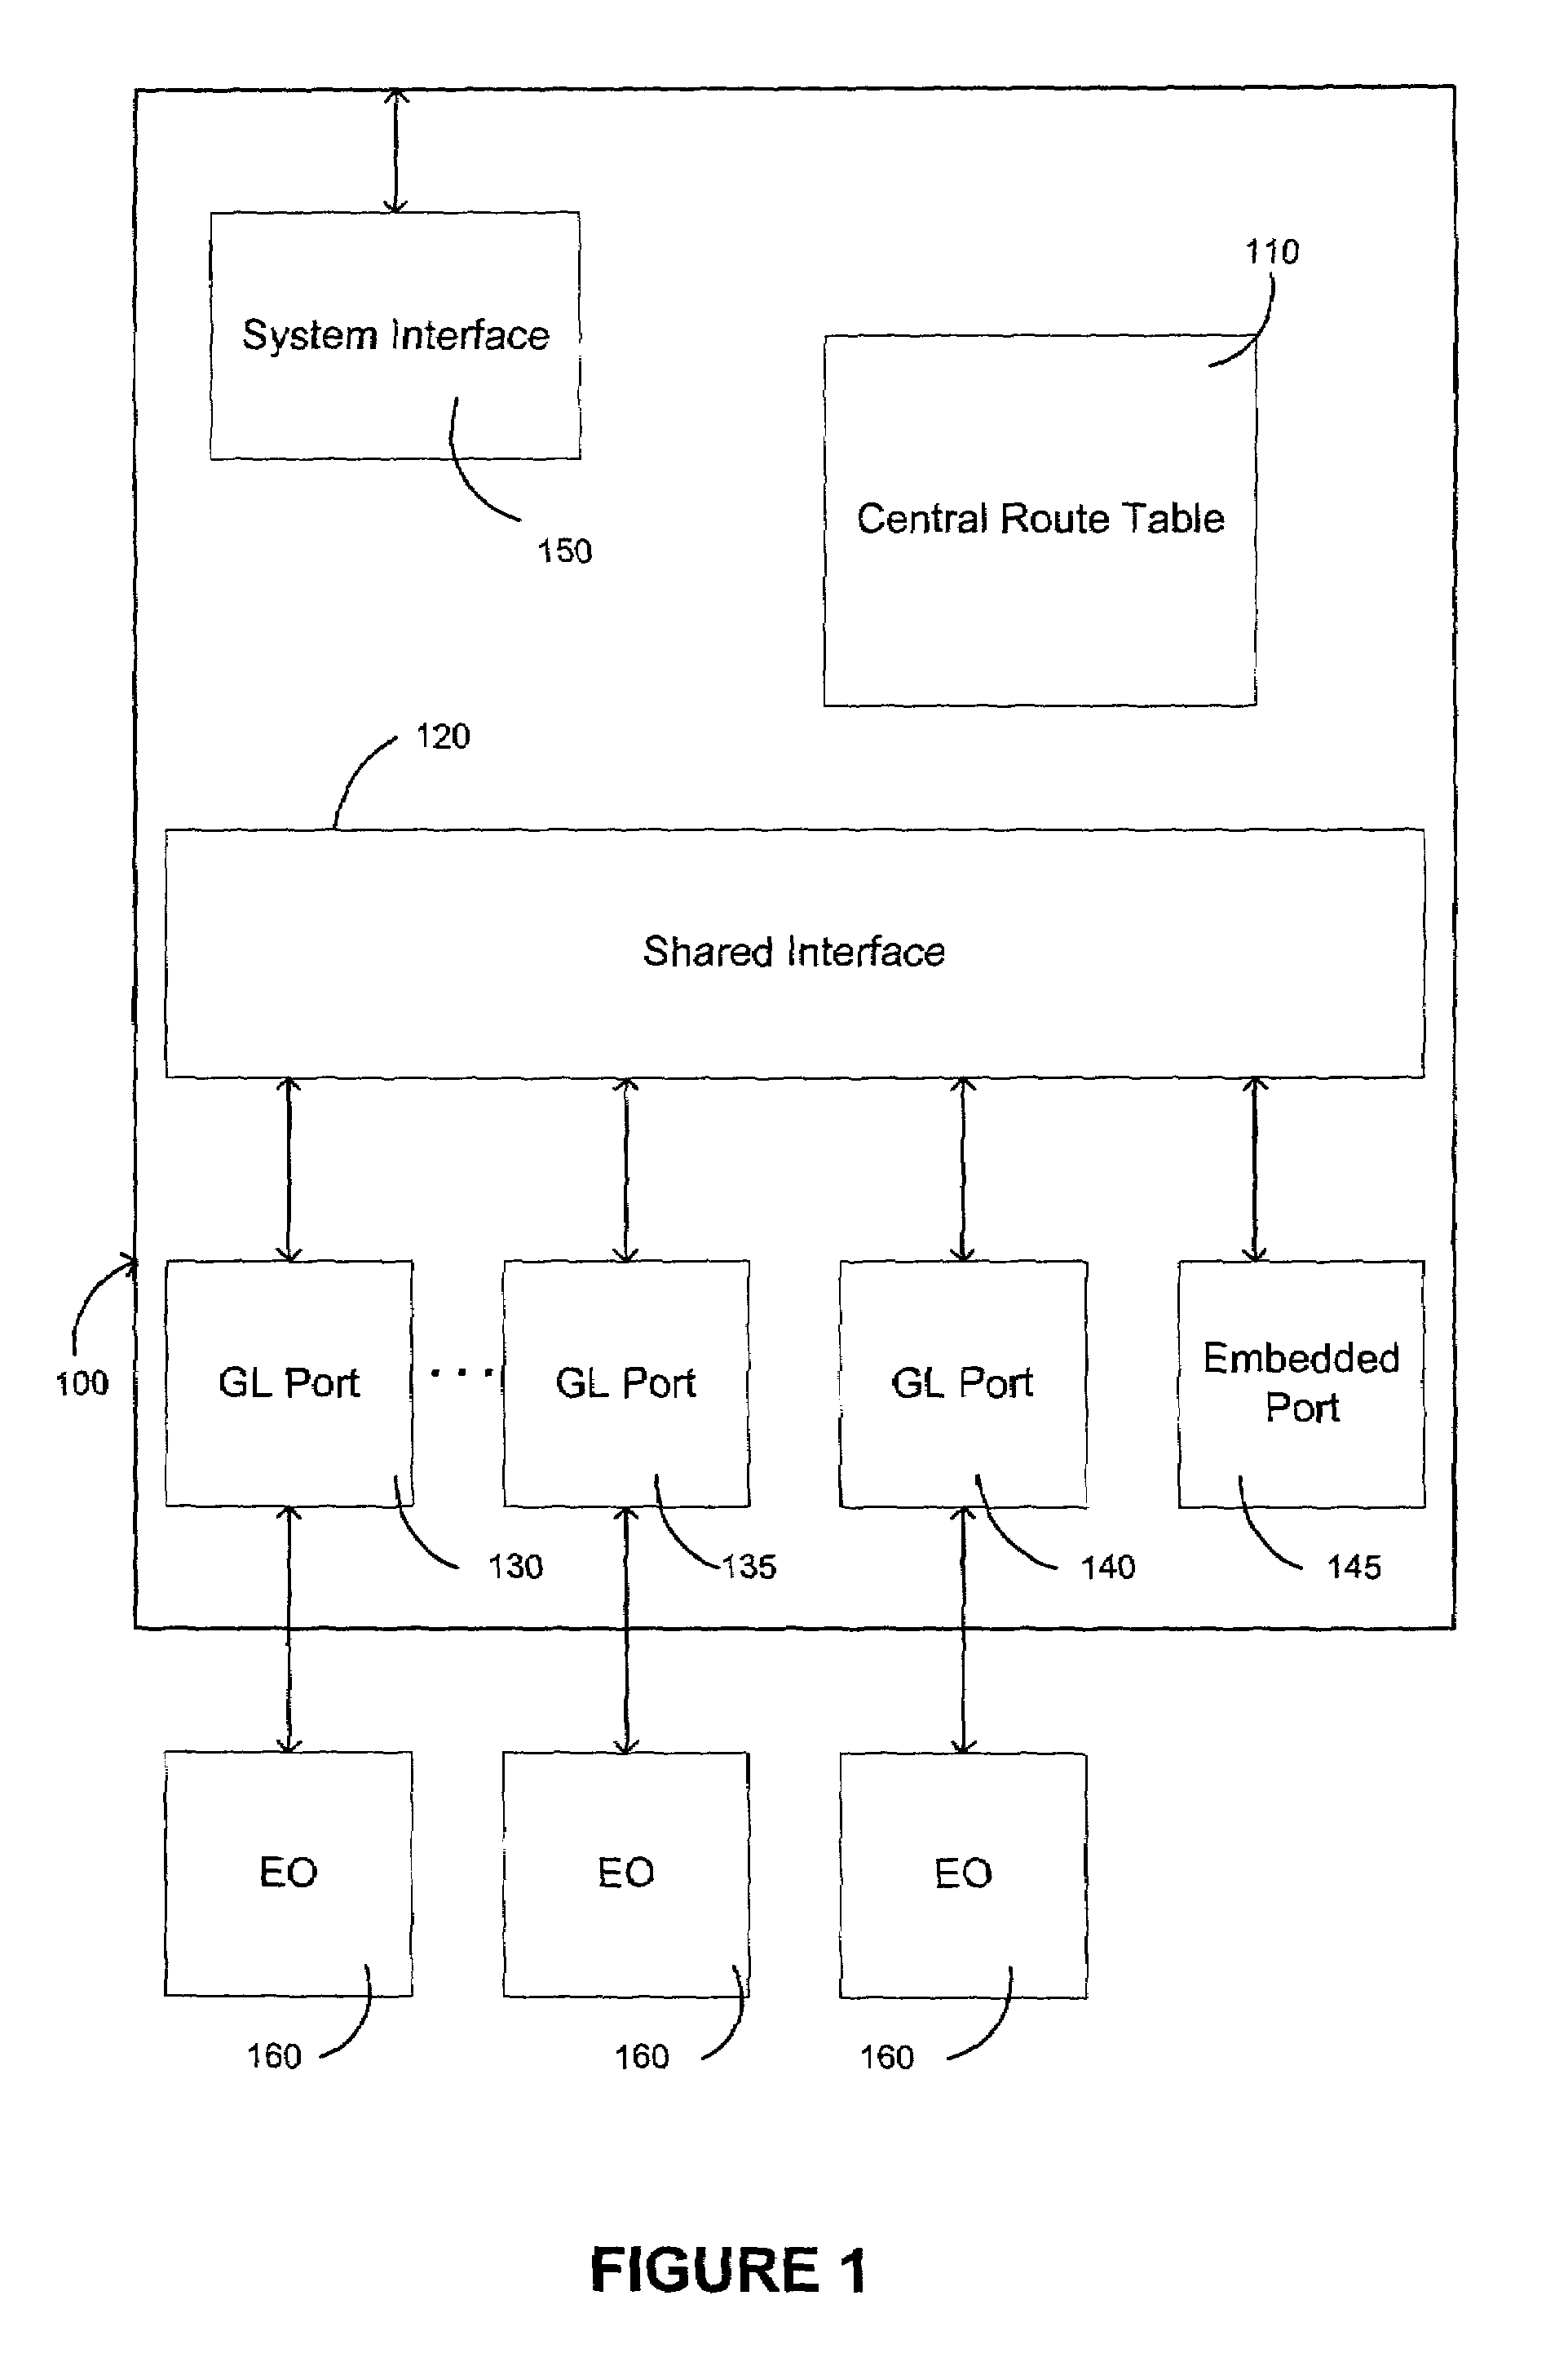 Multi-rate shared memory architecture for frame storage and switching